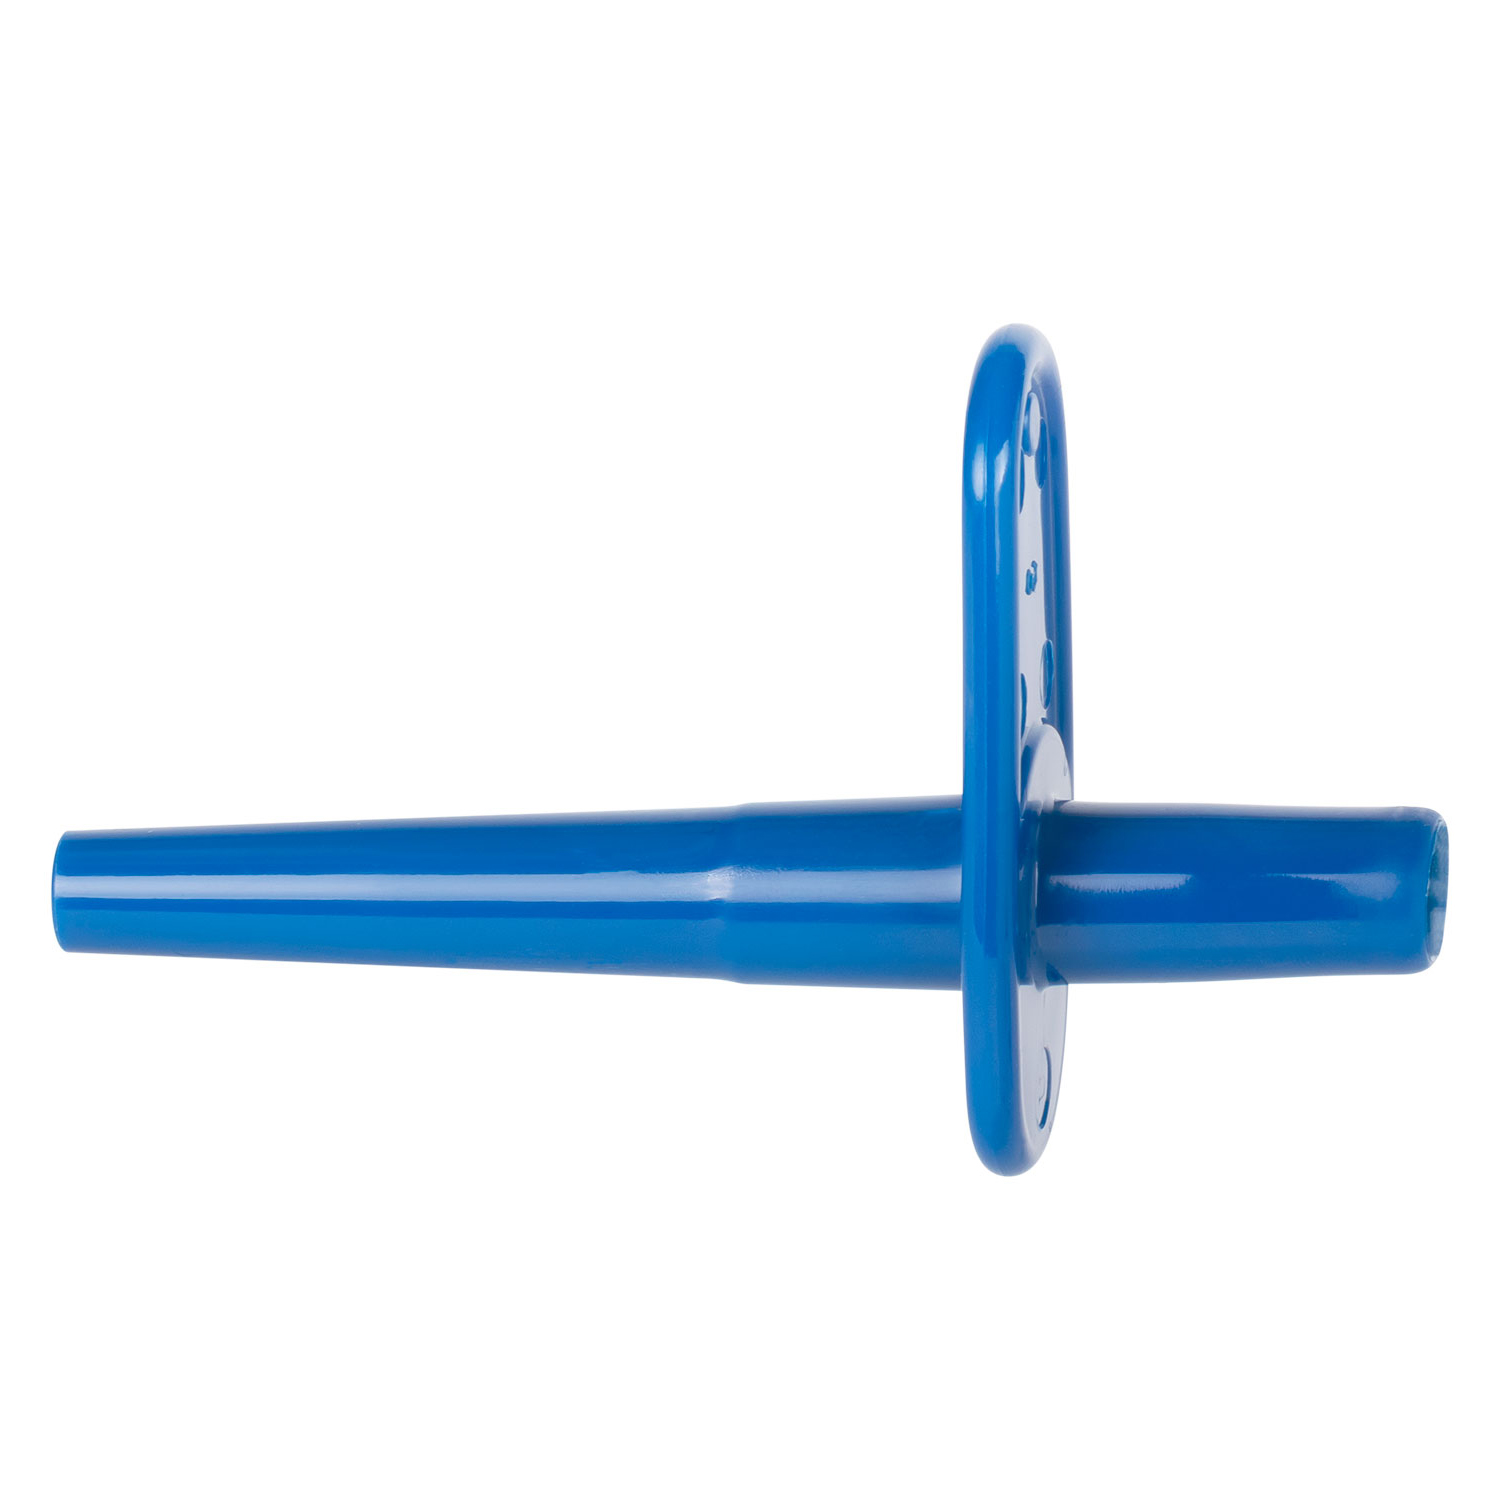 Ø 0.250" opaque Straight Sap Spout for 5/16" tubing